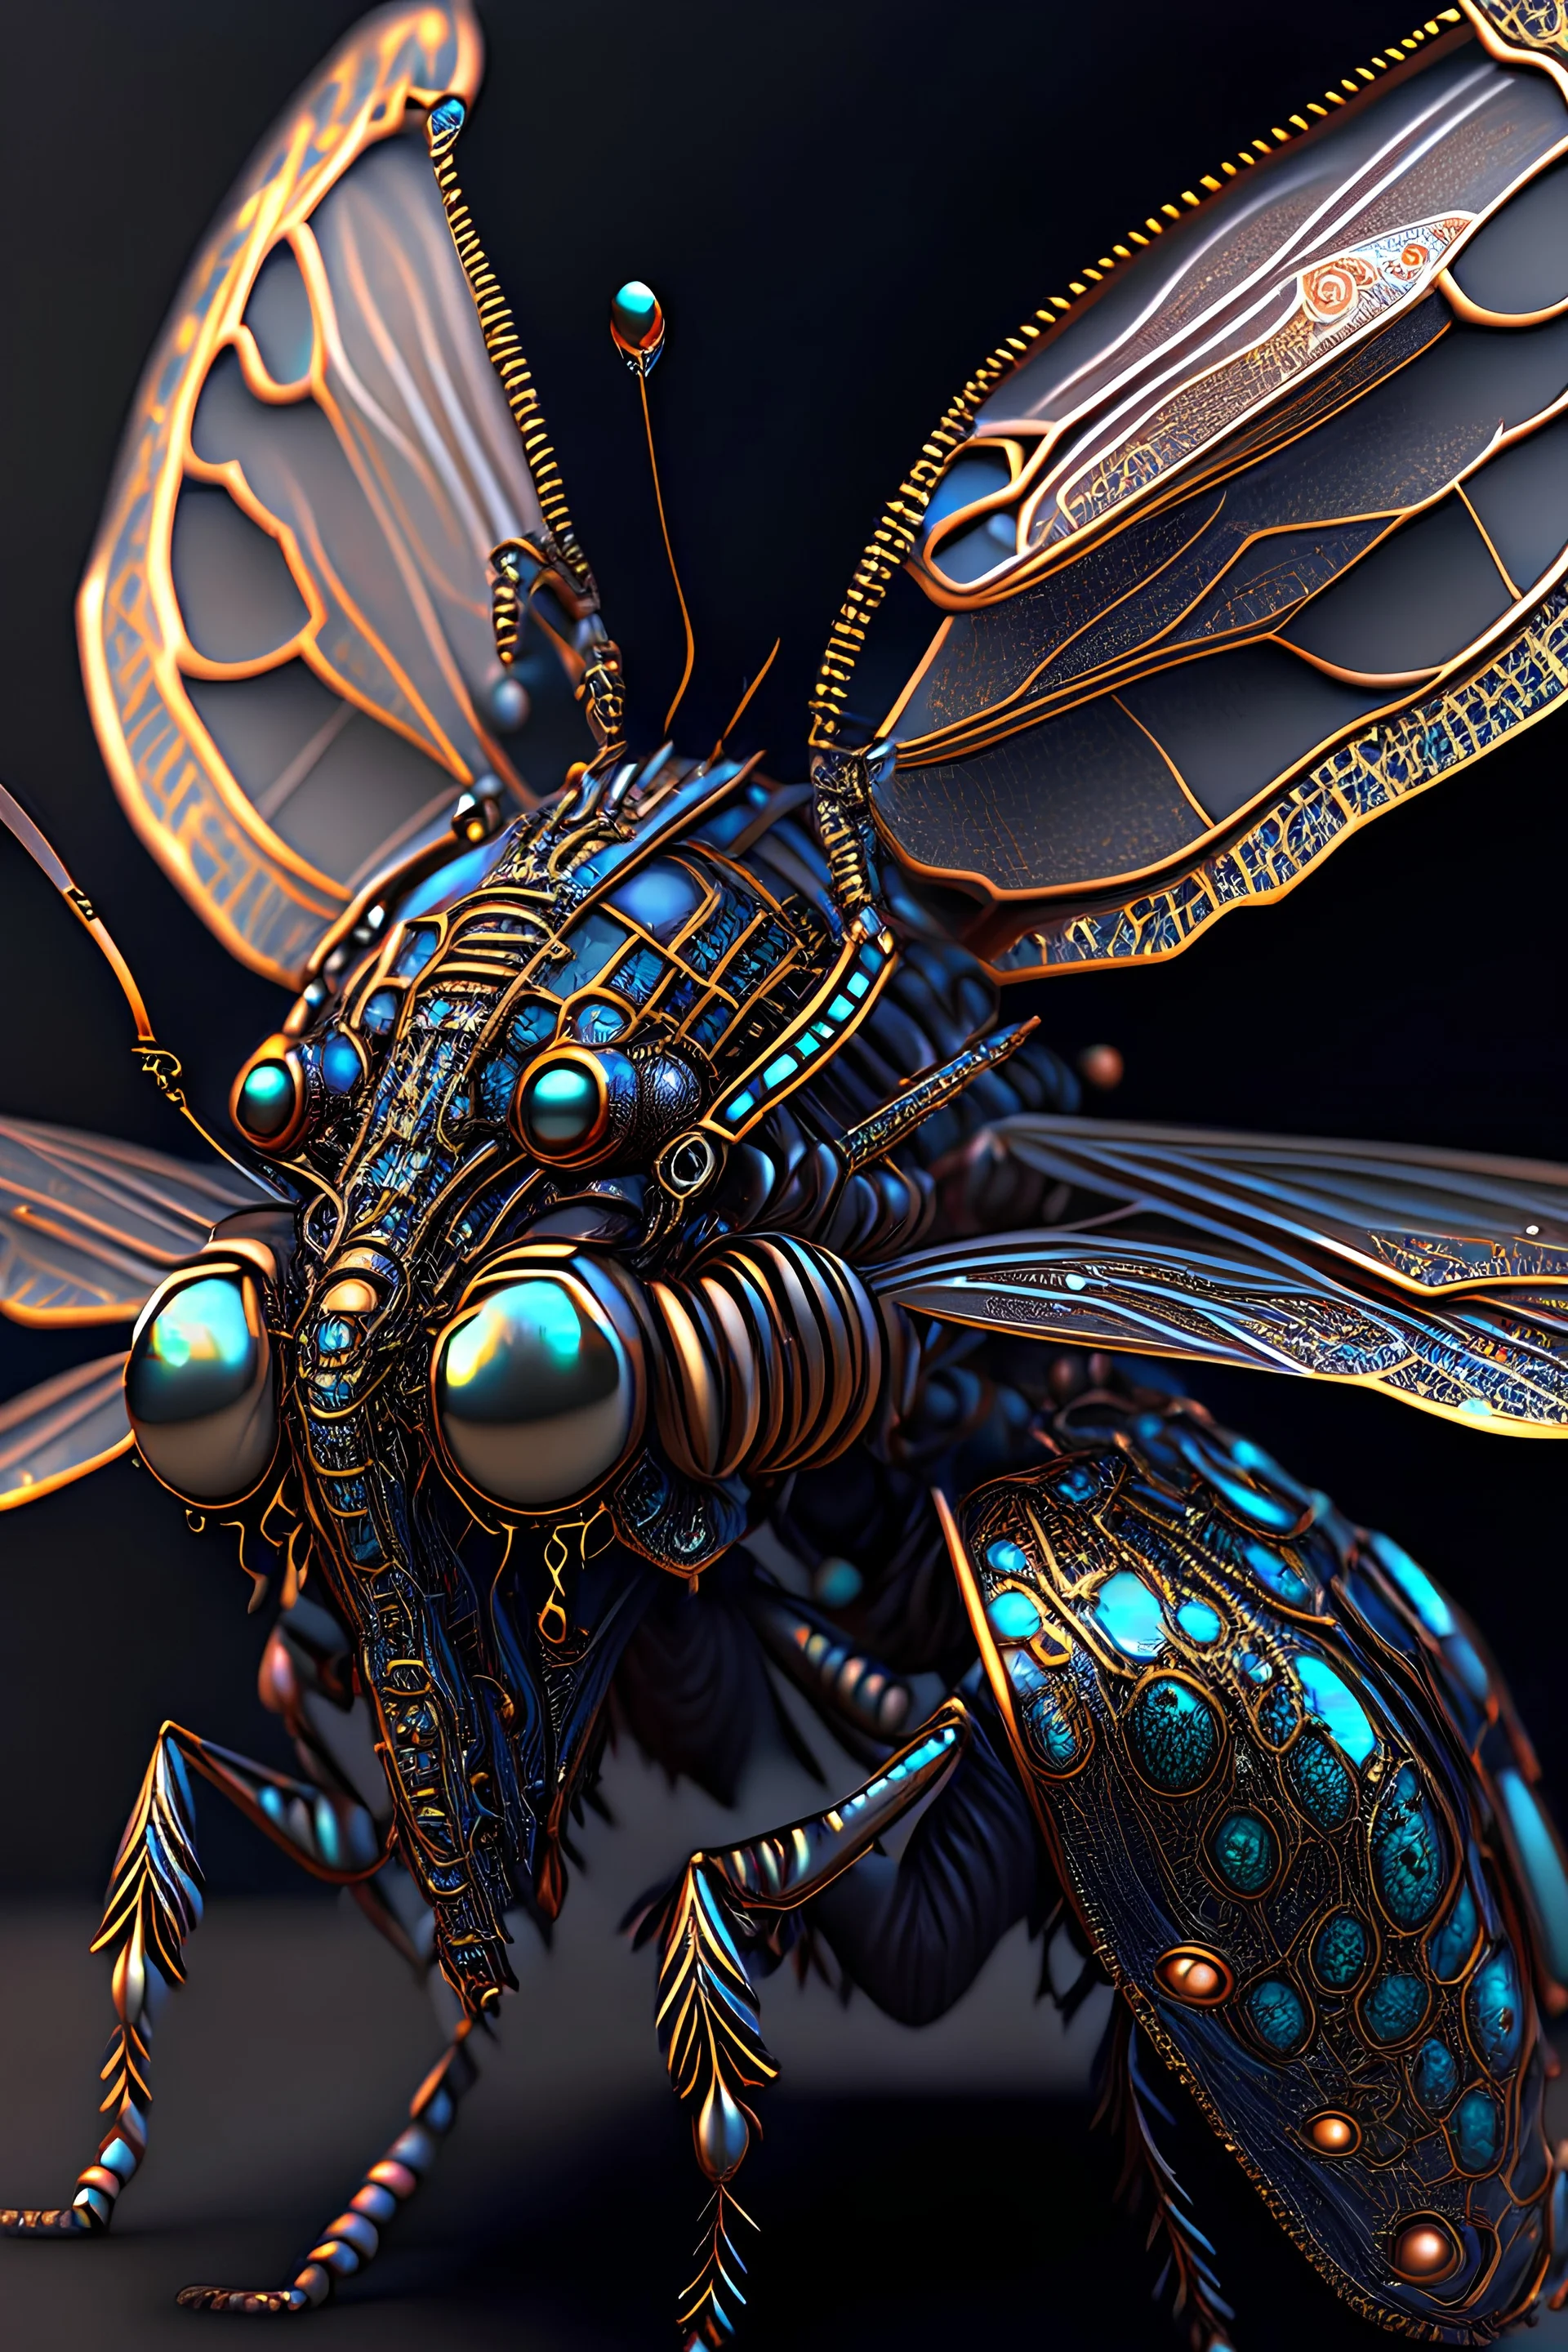 Expressively detailed and intricate 3d rendering of a hyperrealistic “insect”: shinning metal, front view, symetric, 4K, cosmic fractals, dystopian, dendritic, stylized fantasy art by Kris Kuksi, artstation: award-winning: professional portrait: atmospheric: commanding: fantastical: clarity: 16k: ultra quality: striking: brilliance: stunning colors: masterfully crafted.